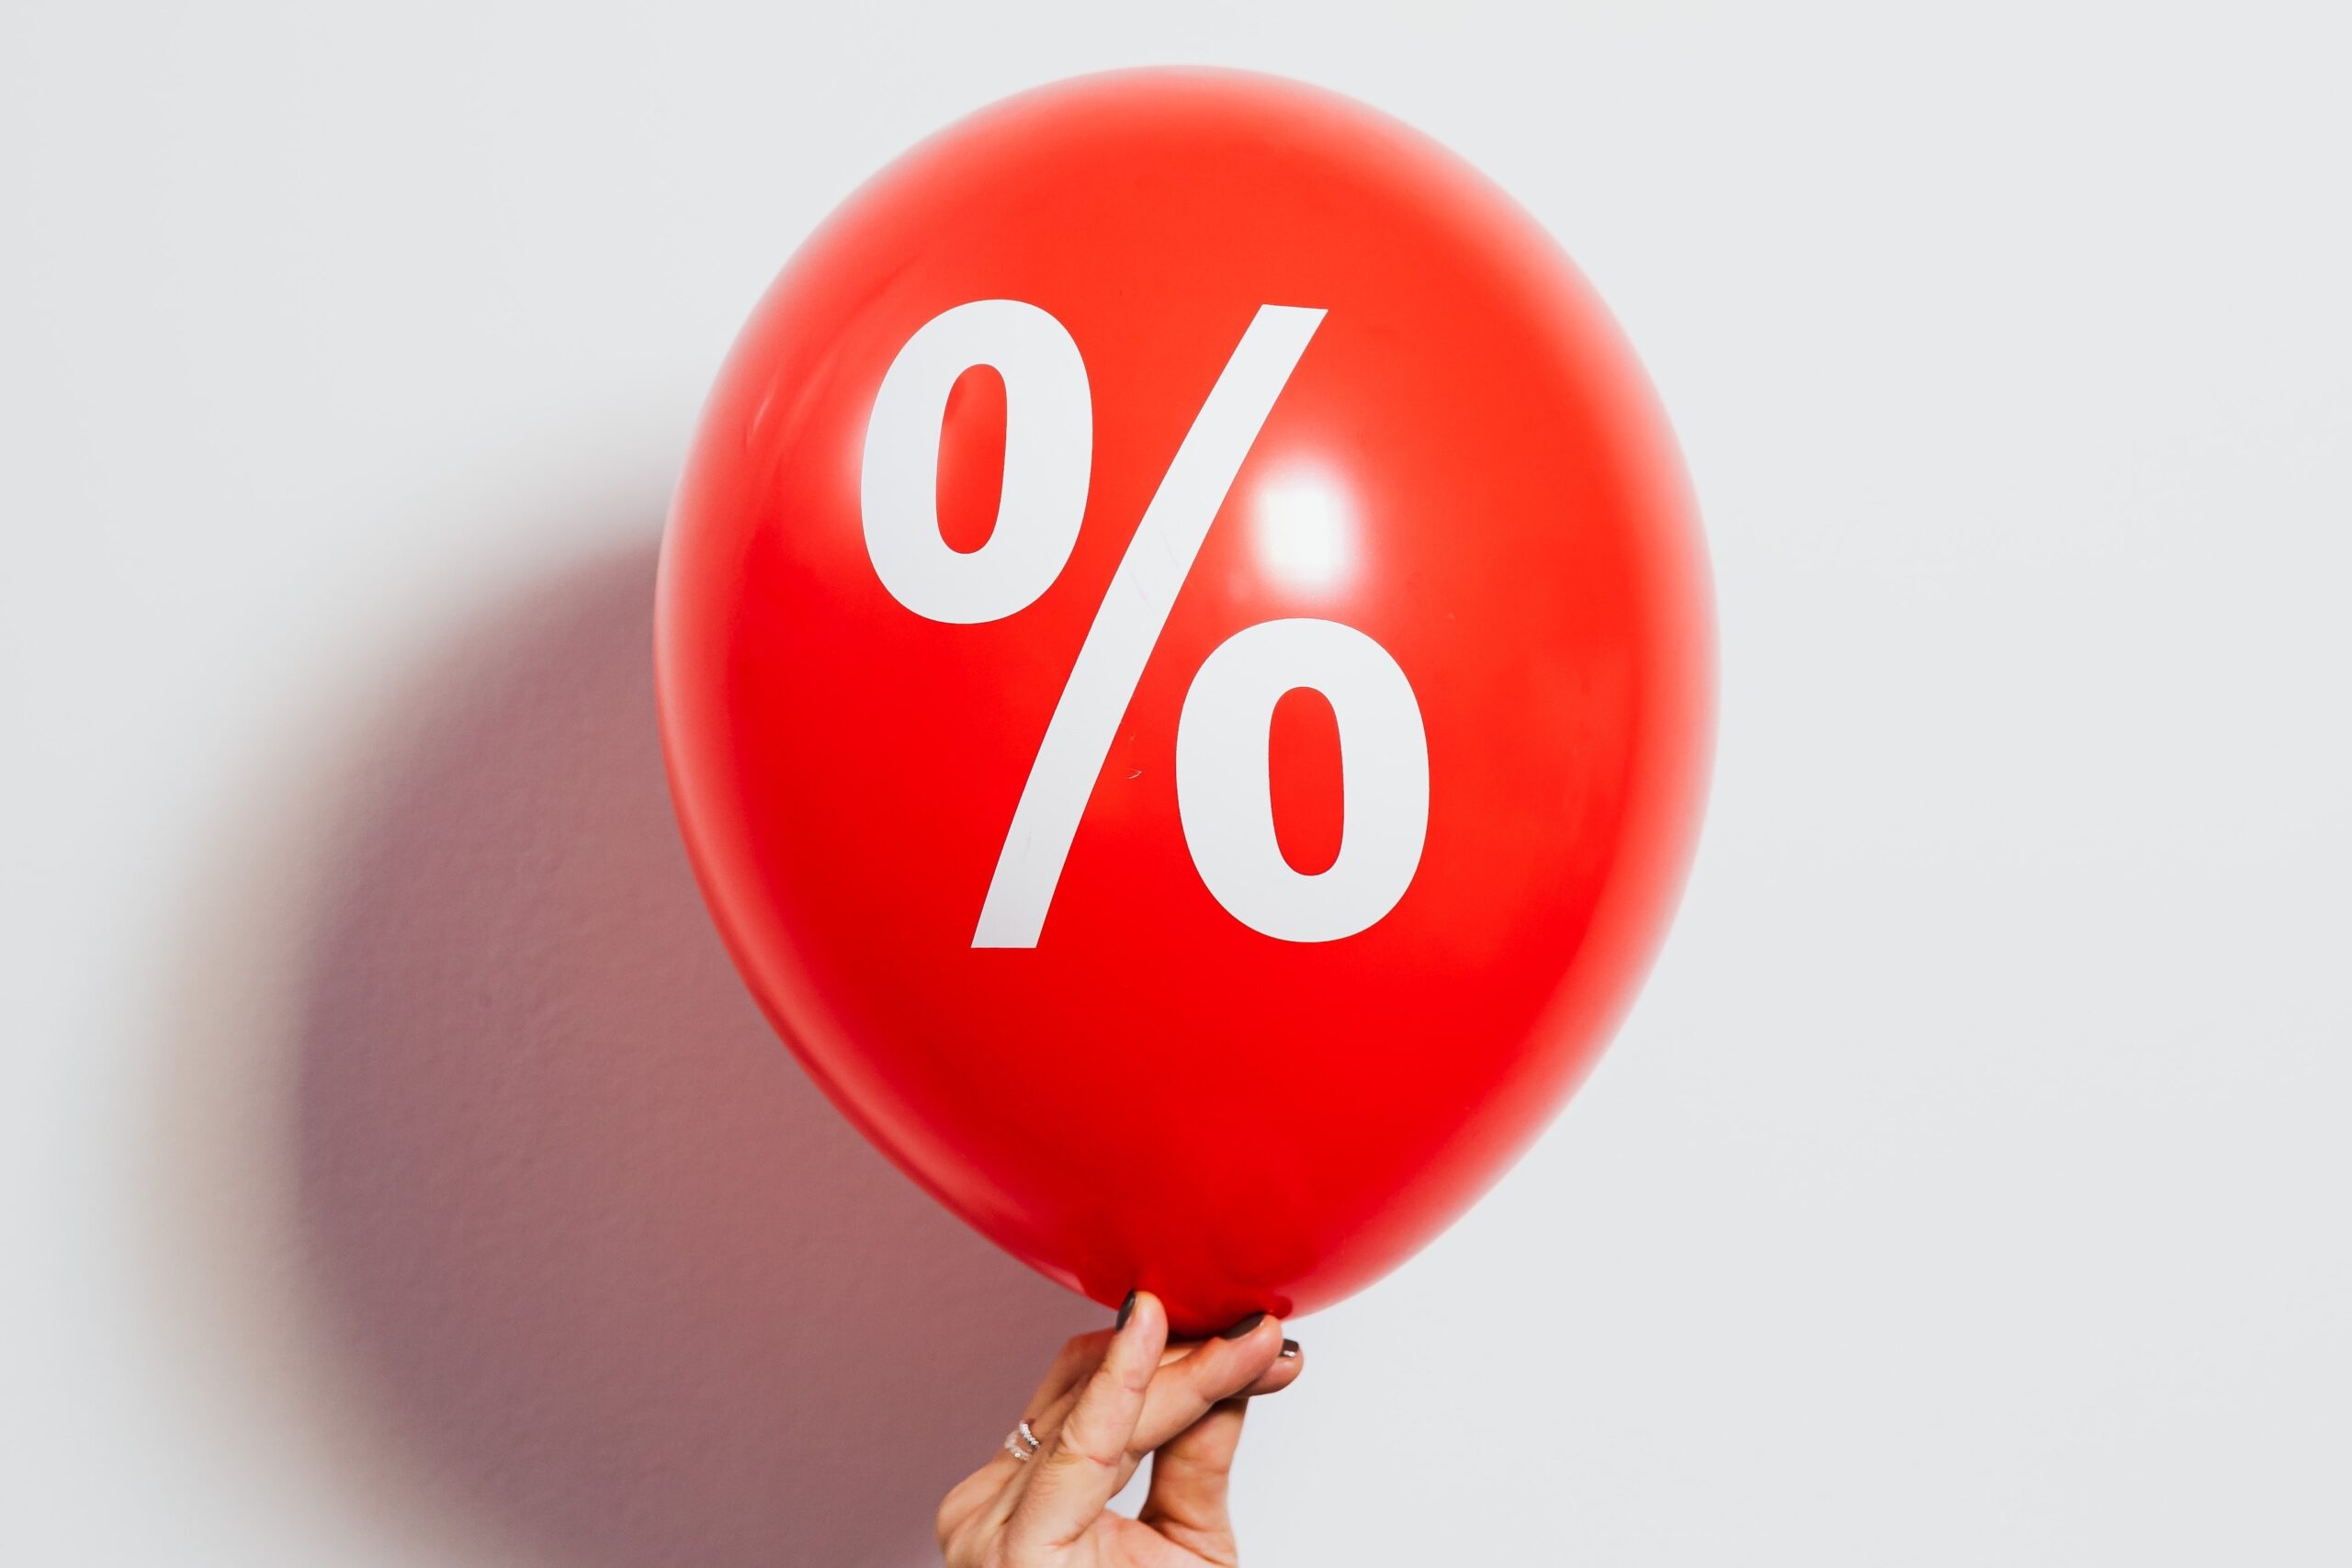 Woman's hand holding up a red balloon with a % symbol written on it